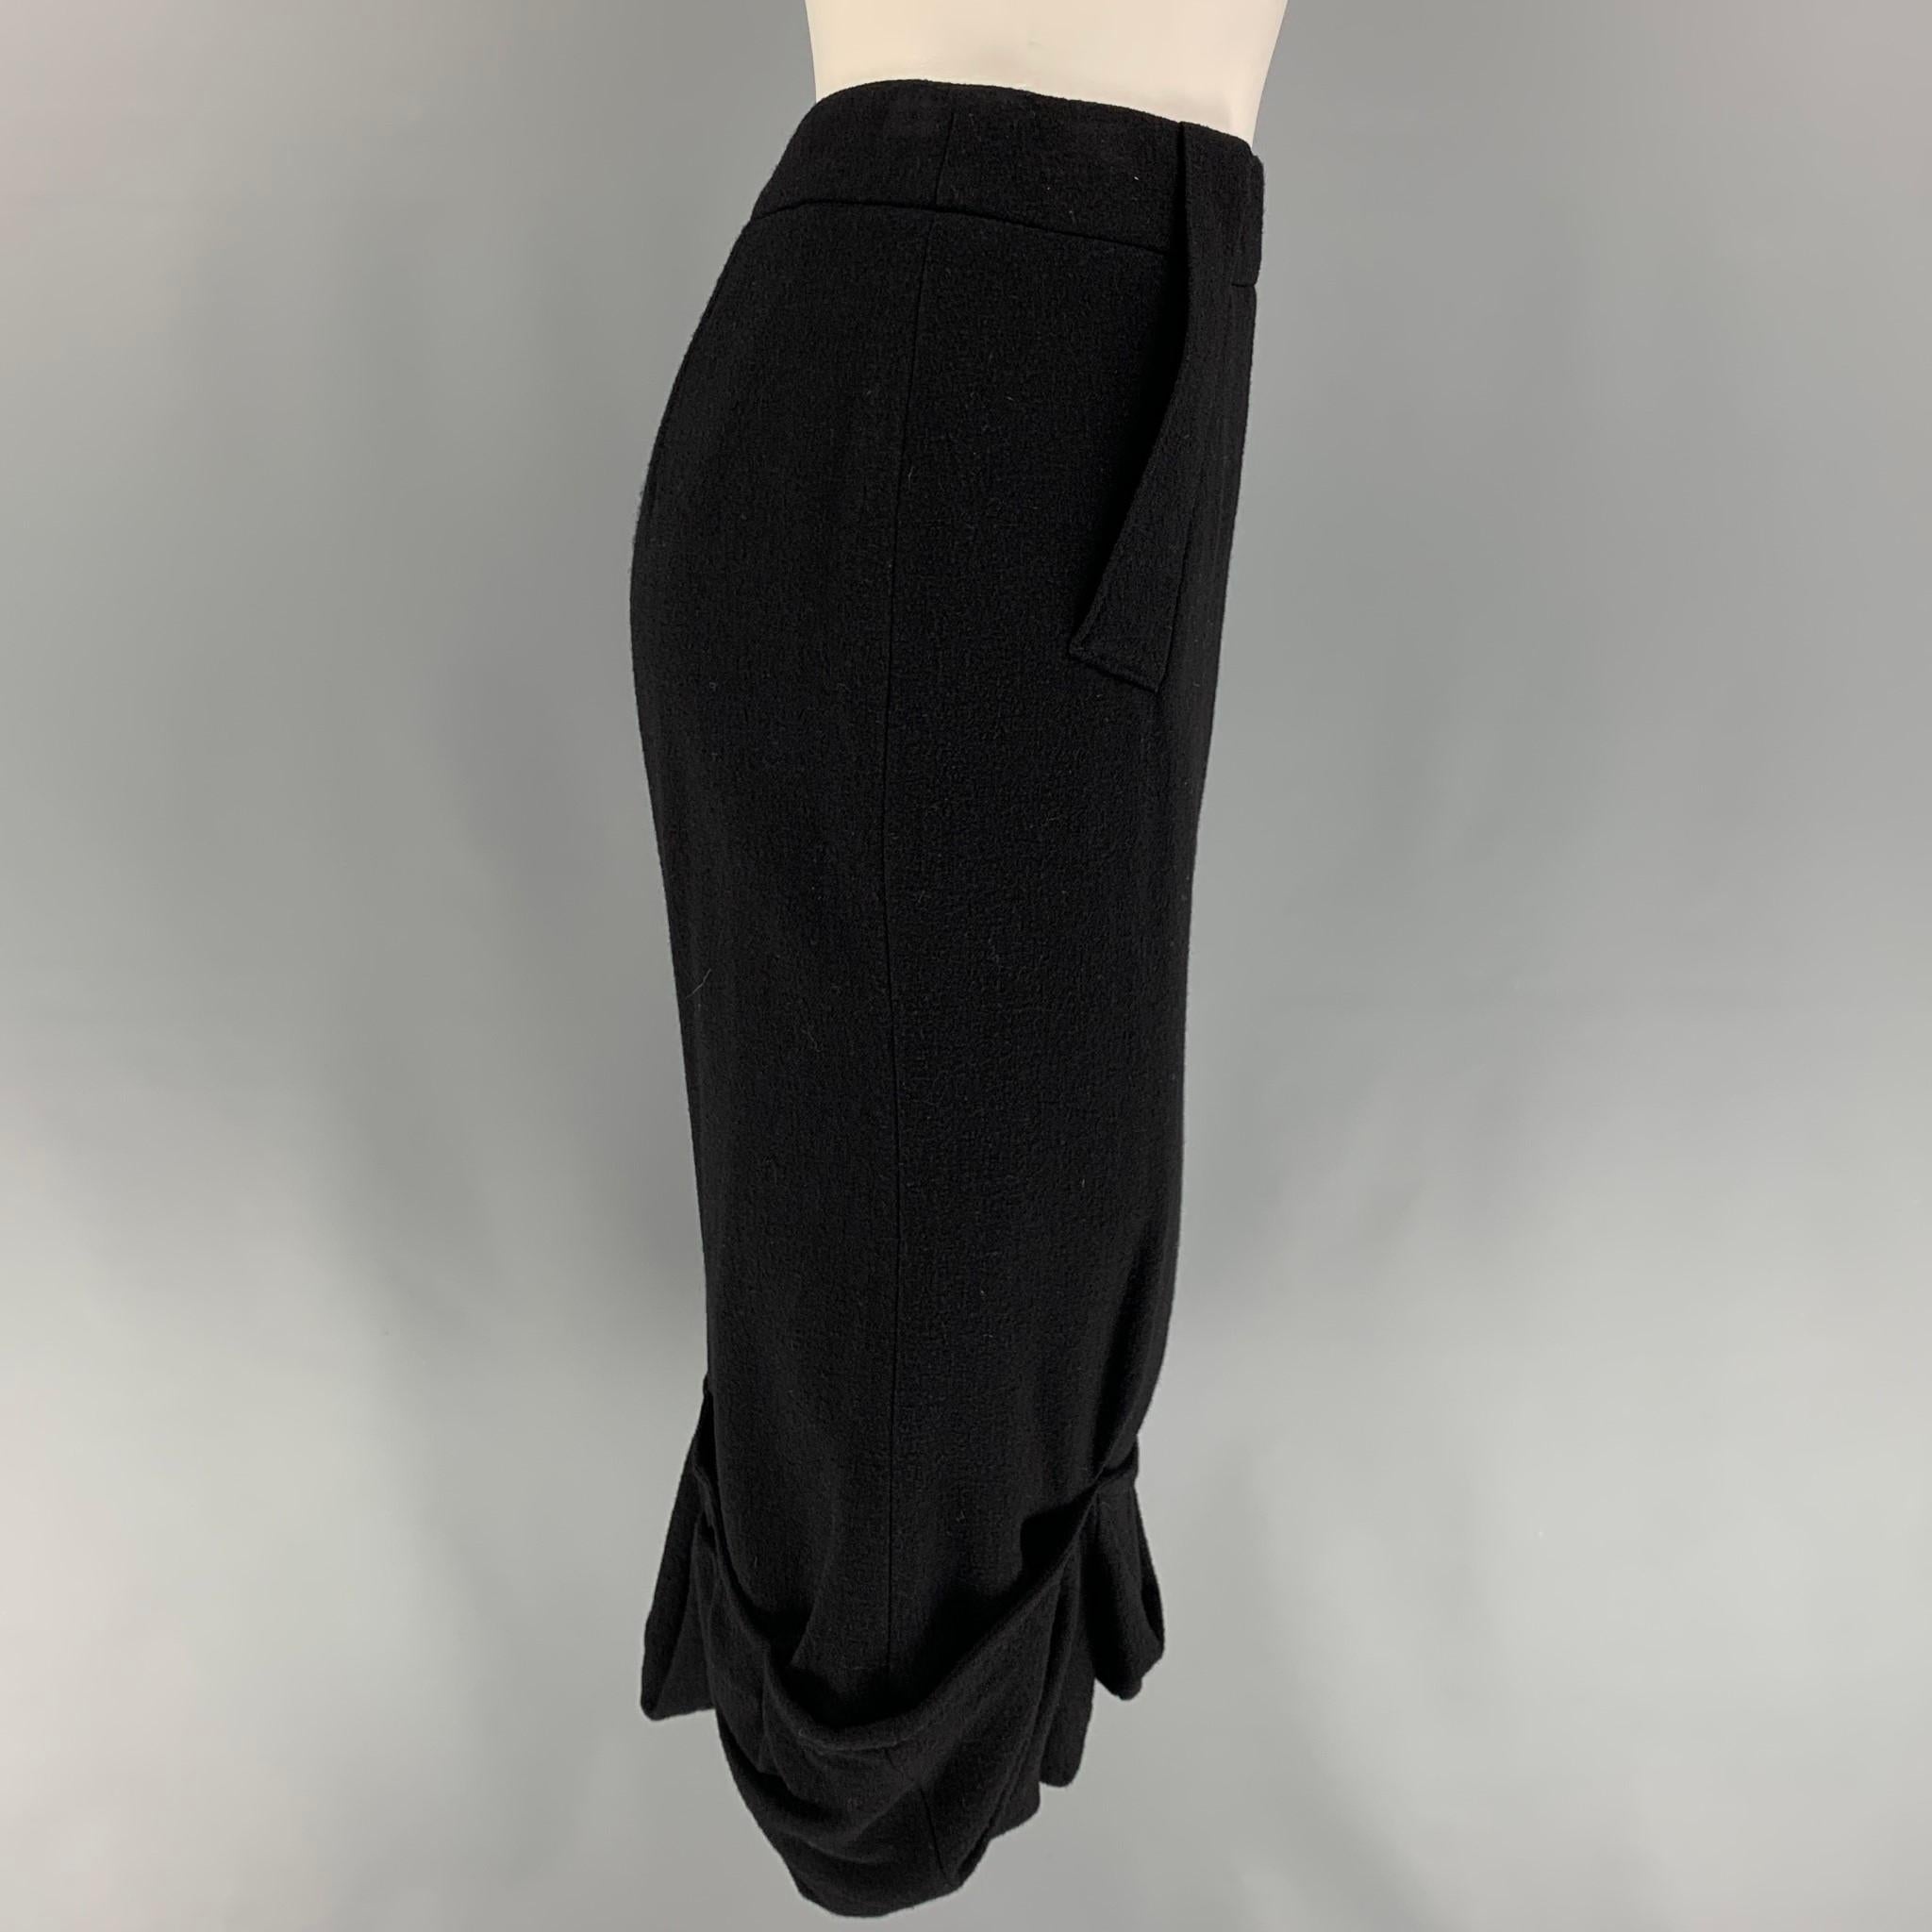 GIVENCHY skirt comes in a black wool featuring a ruffled hem, pencil style, and a back zip up closure. Made in Italy. 

Very Good Pre-Owned Condition.
Marked: 36

Measurements:

Waist: 27 in.
Hip: 32 in.
Length: 29 in. 